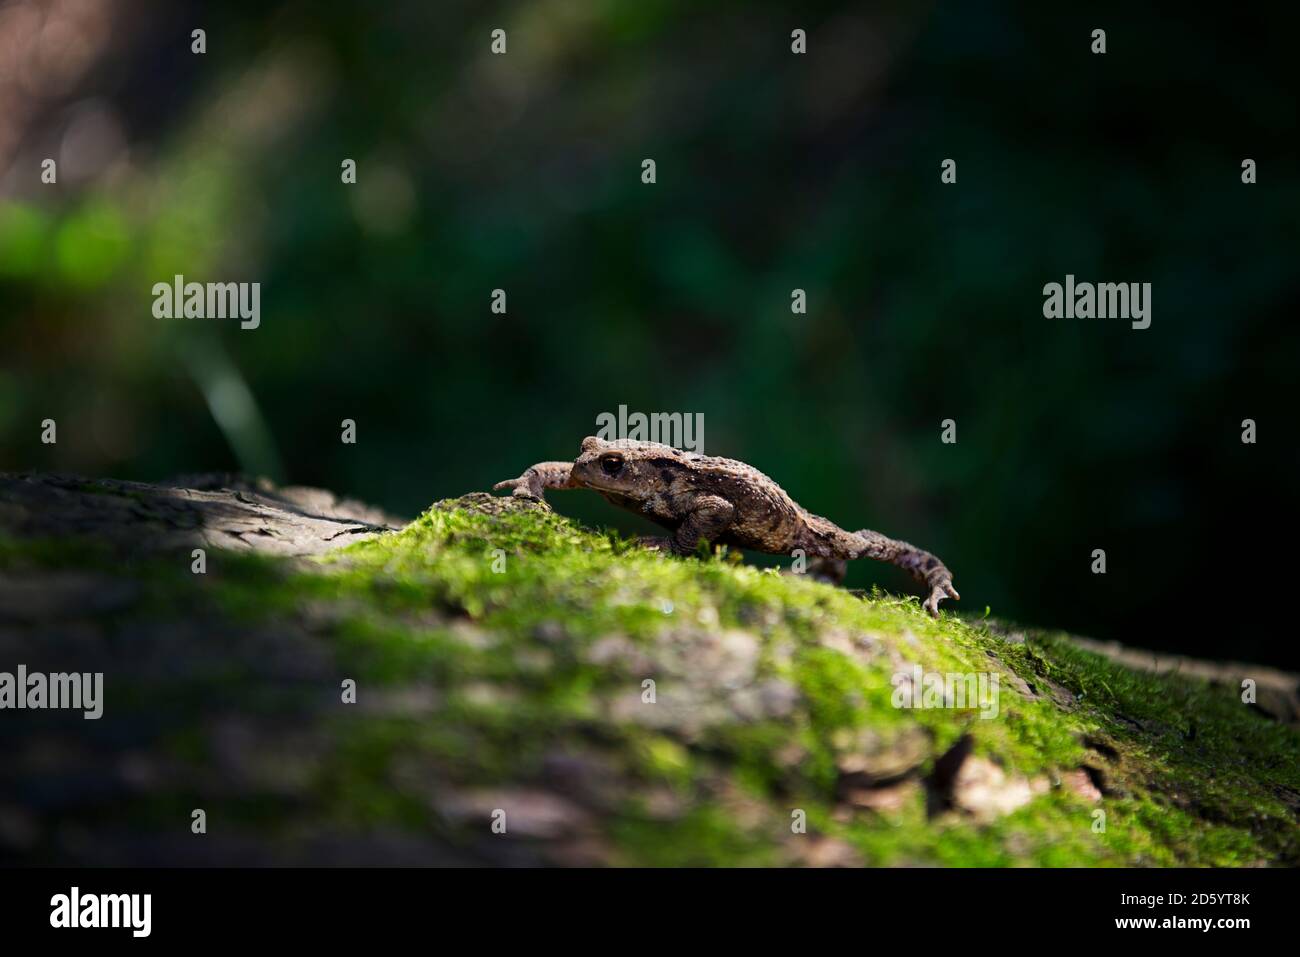 Toad, Bufonidae, on a mossy surface Stock Photo